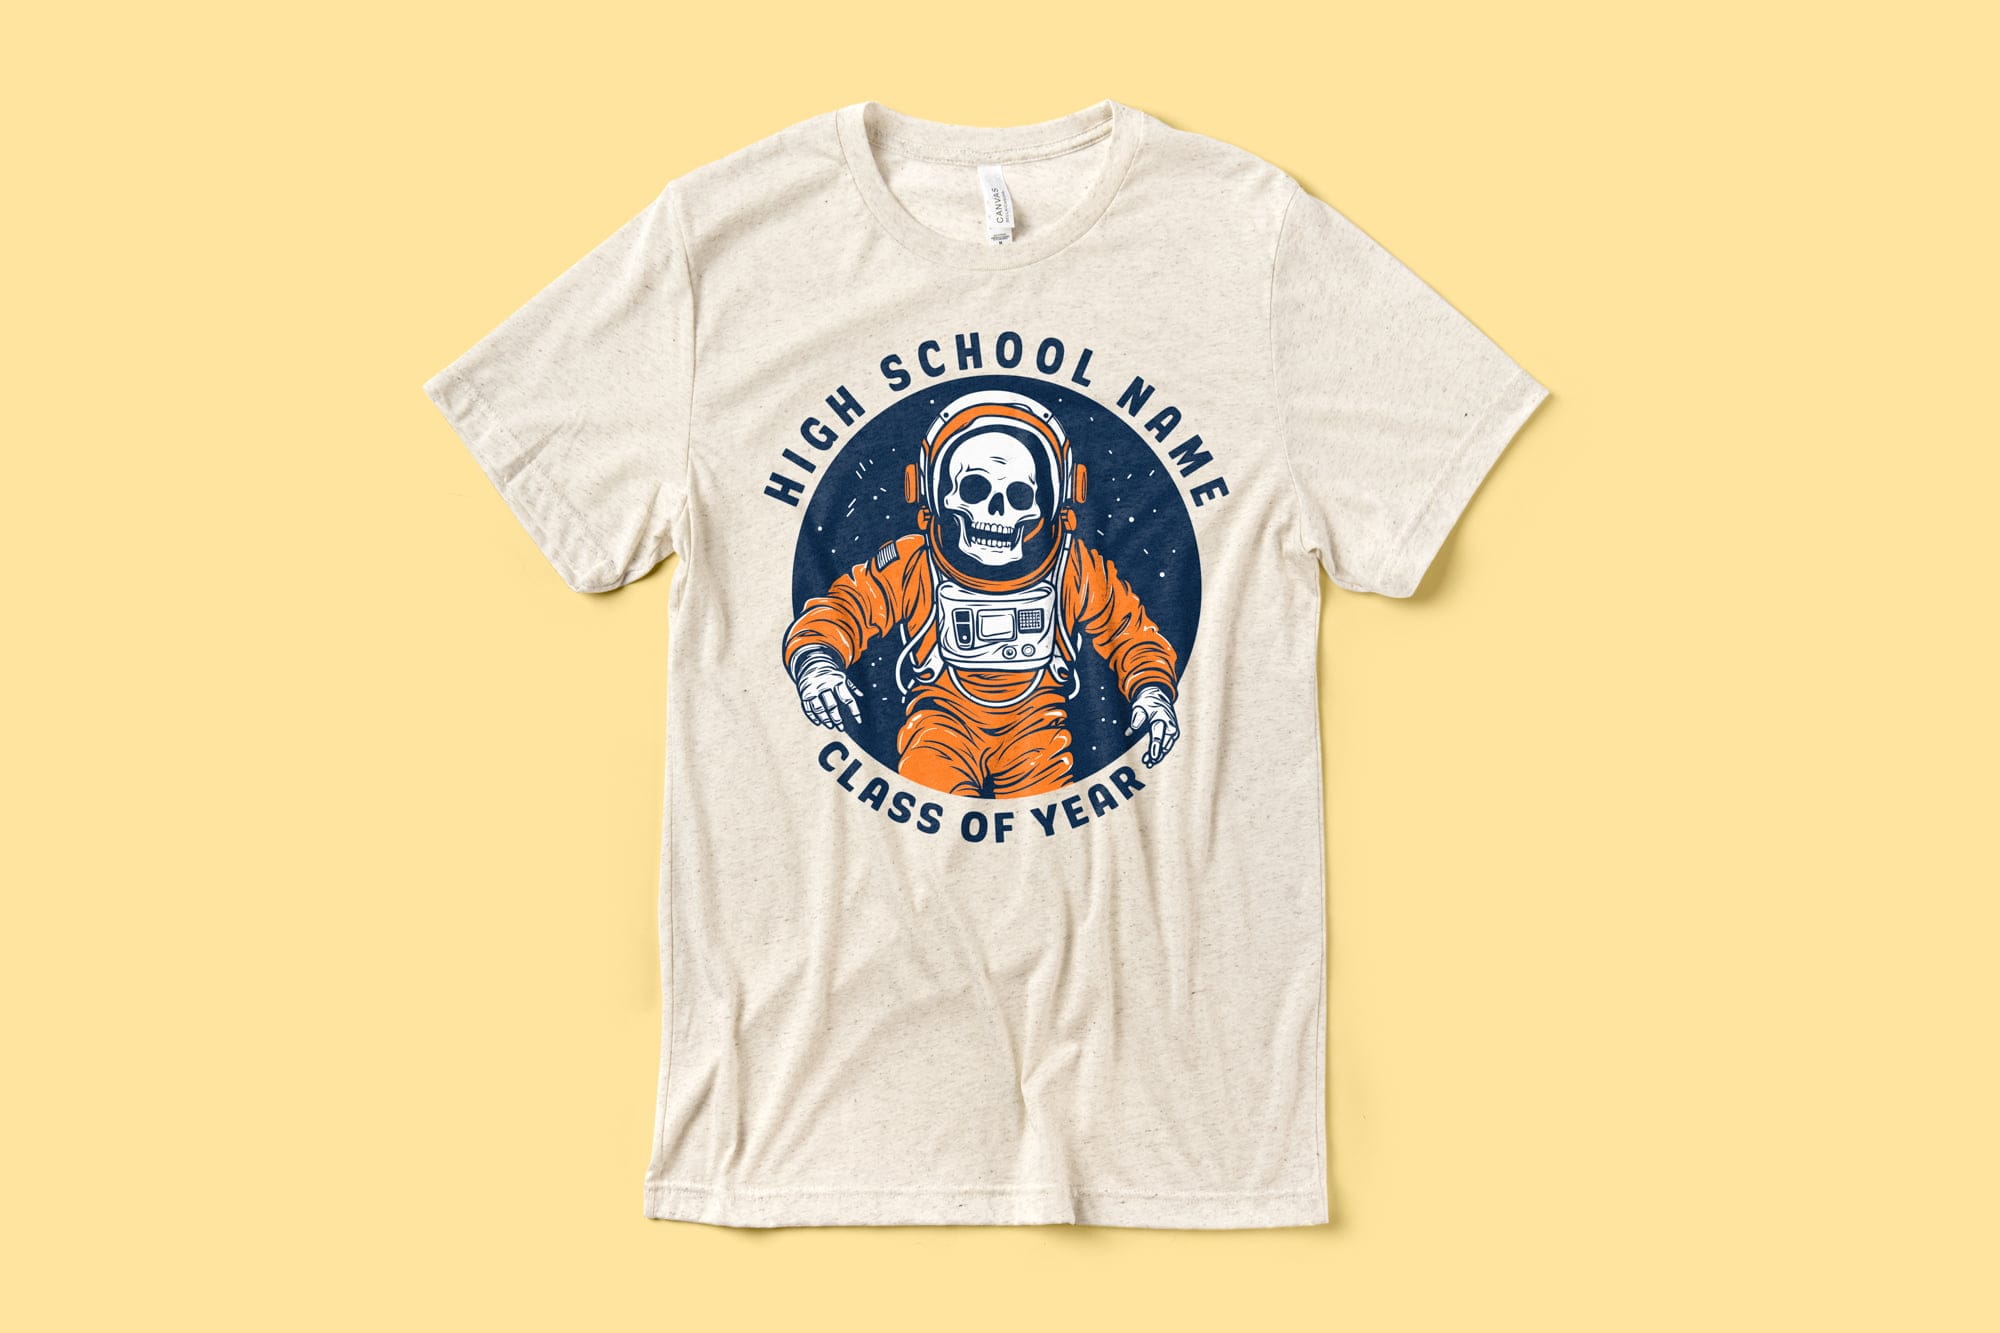 A fun outer space themed deign that shows a skeleton astronaut floating in space.